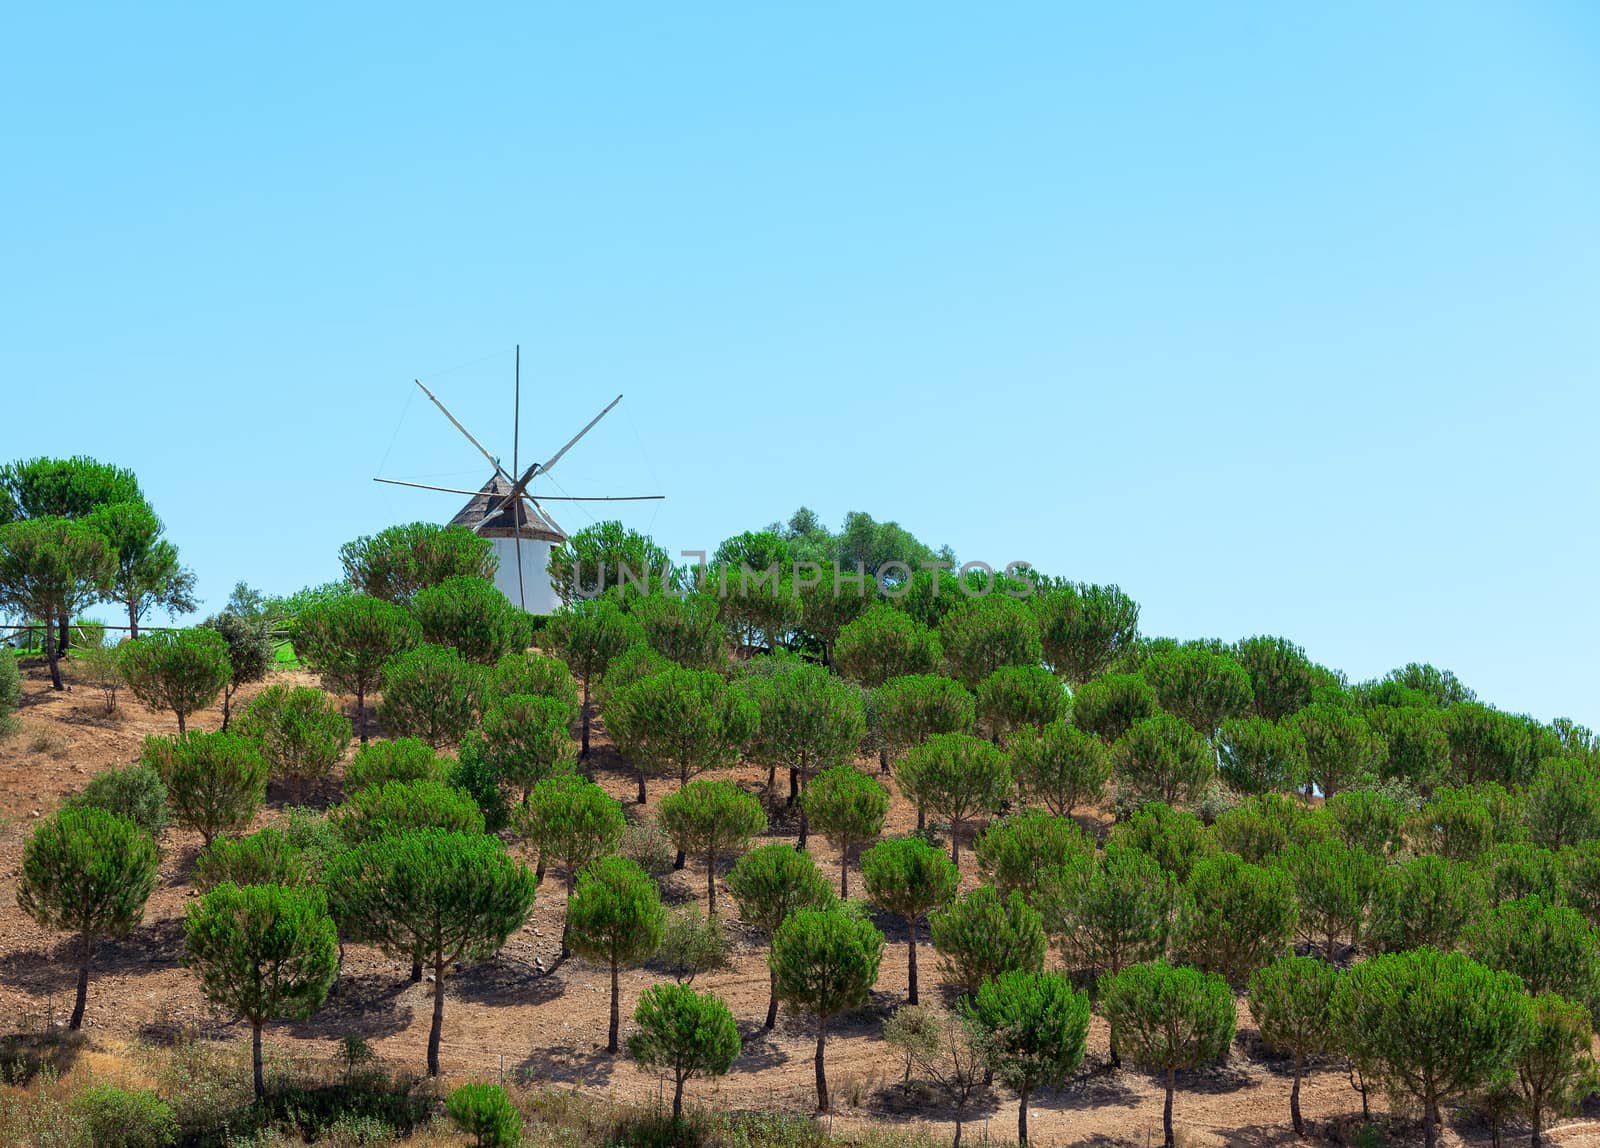 Windmill above a plantation of trees on a farm with its sails or vanes visible against the blue sky